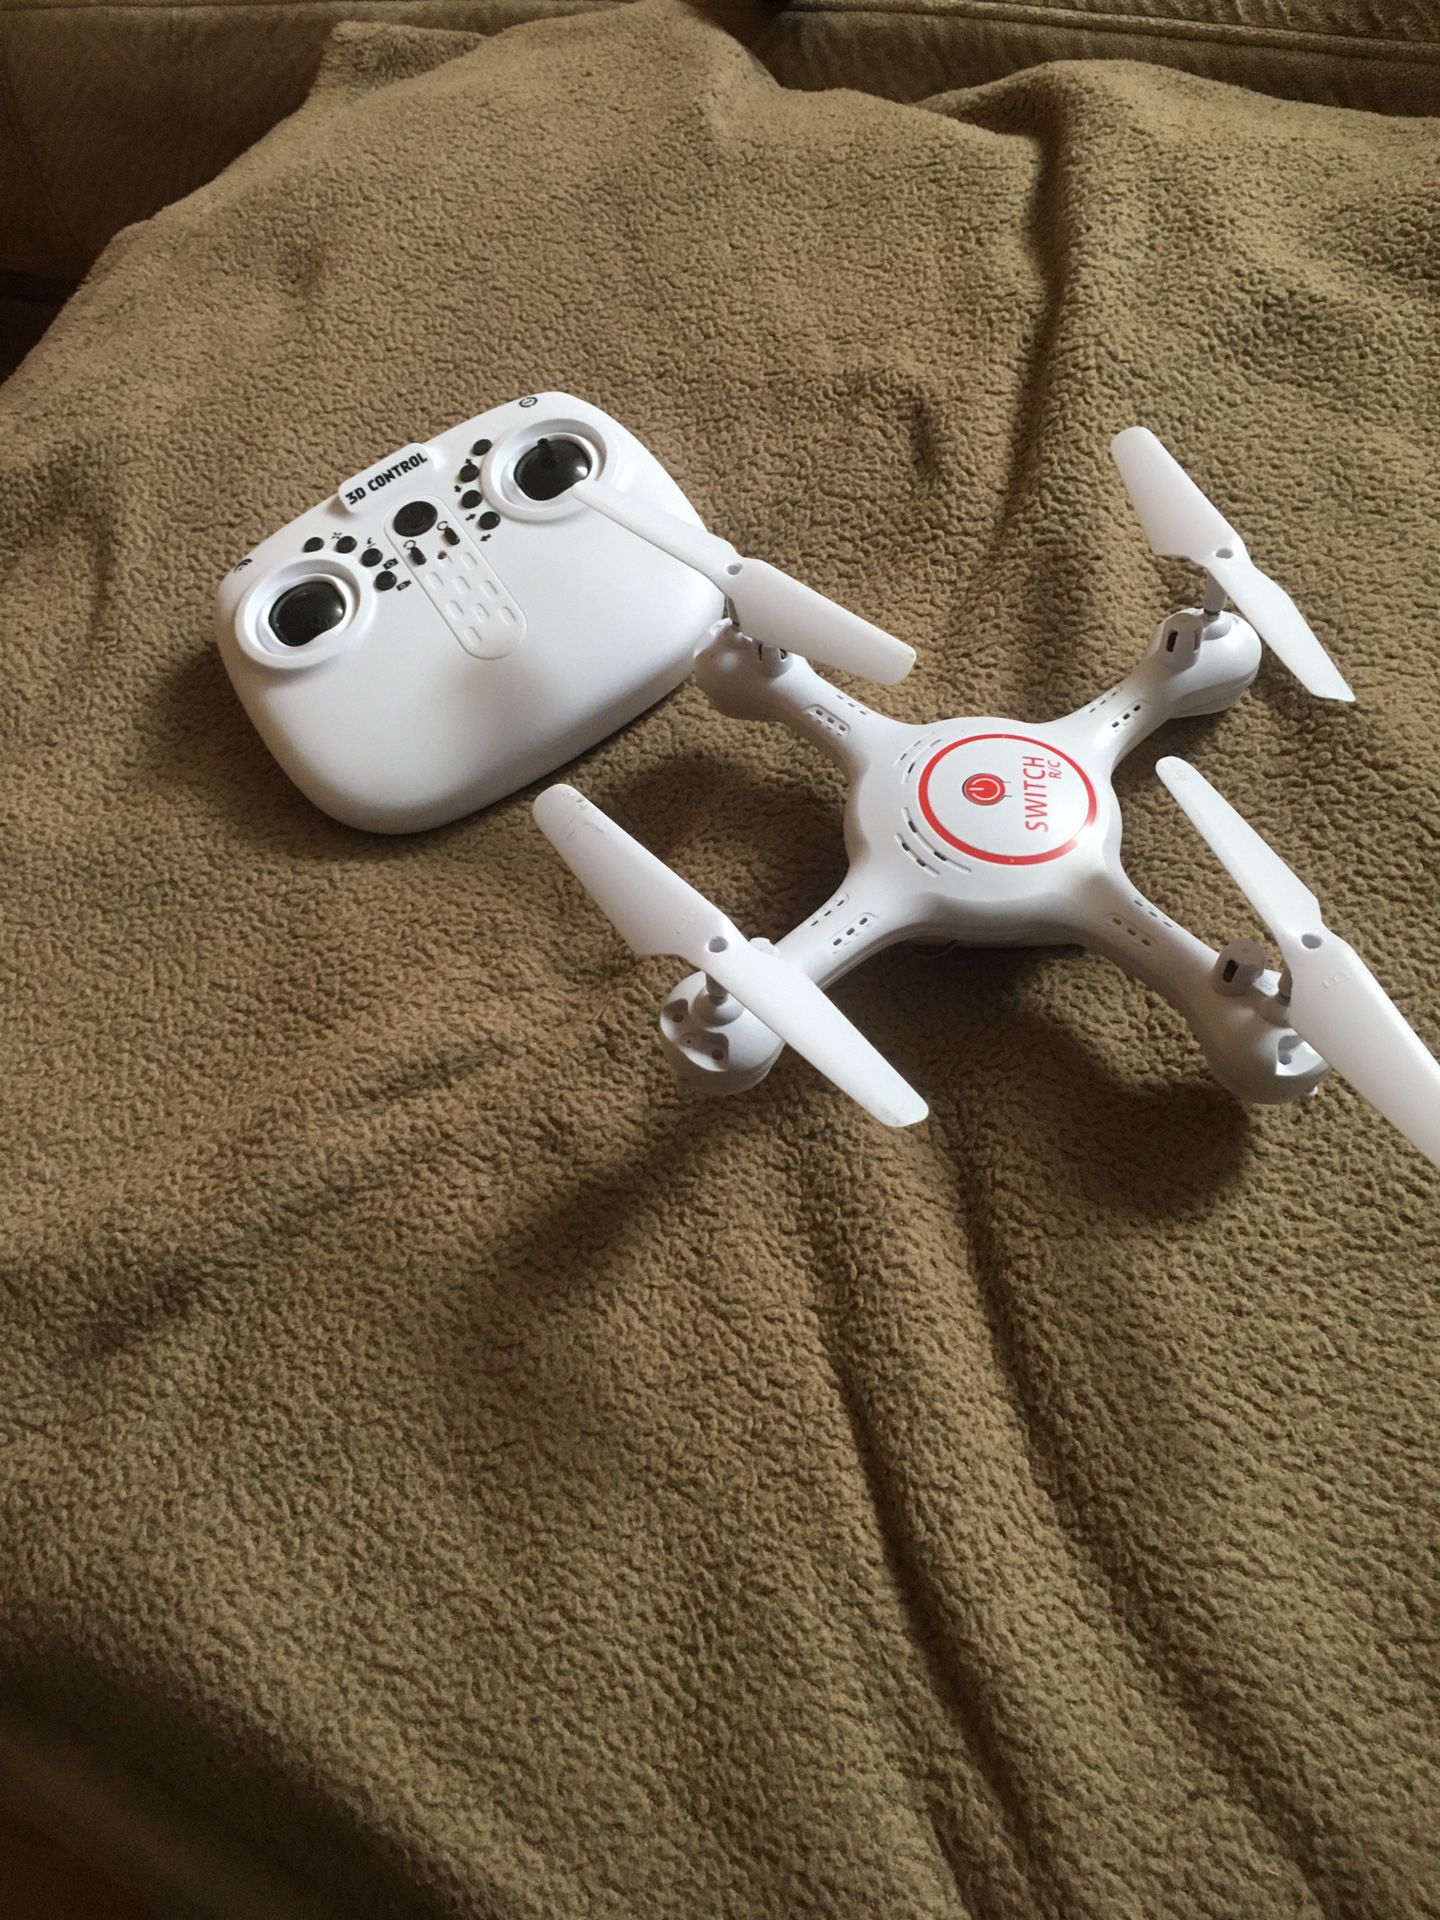 White drone best offer has camera